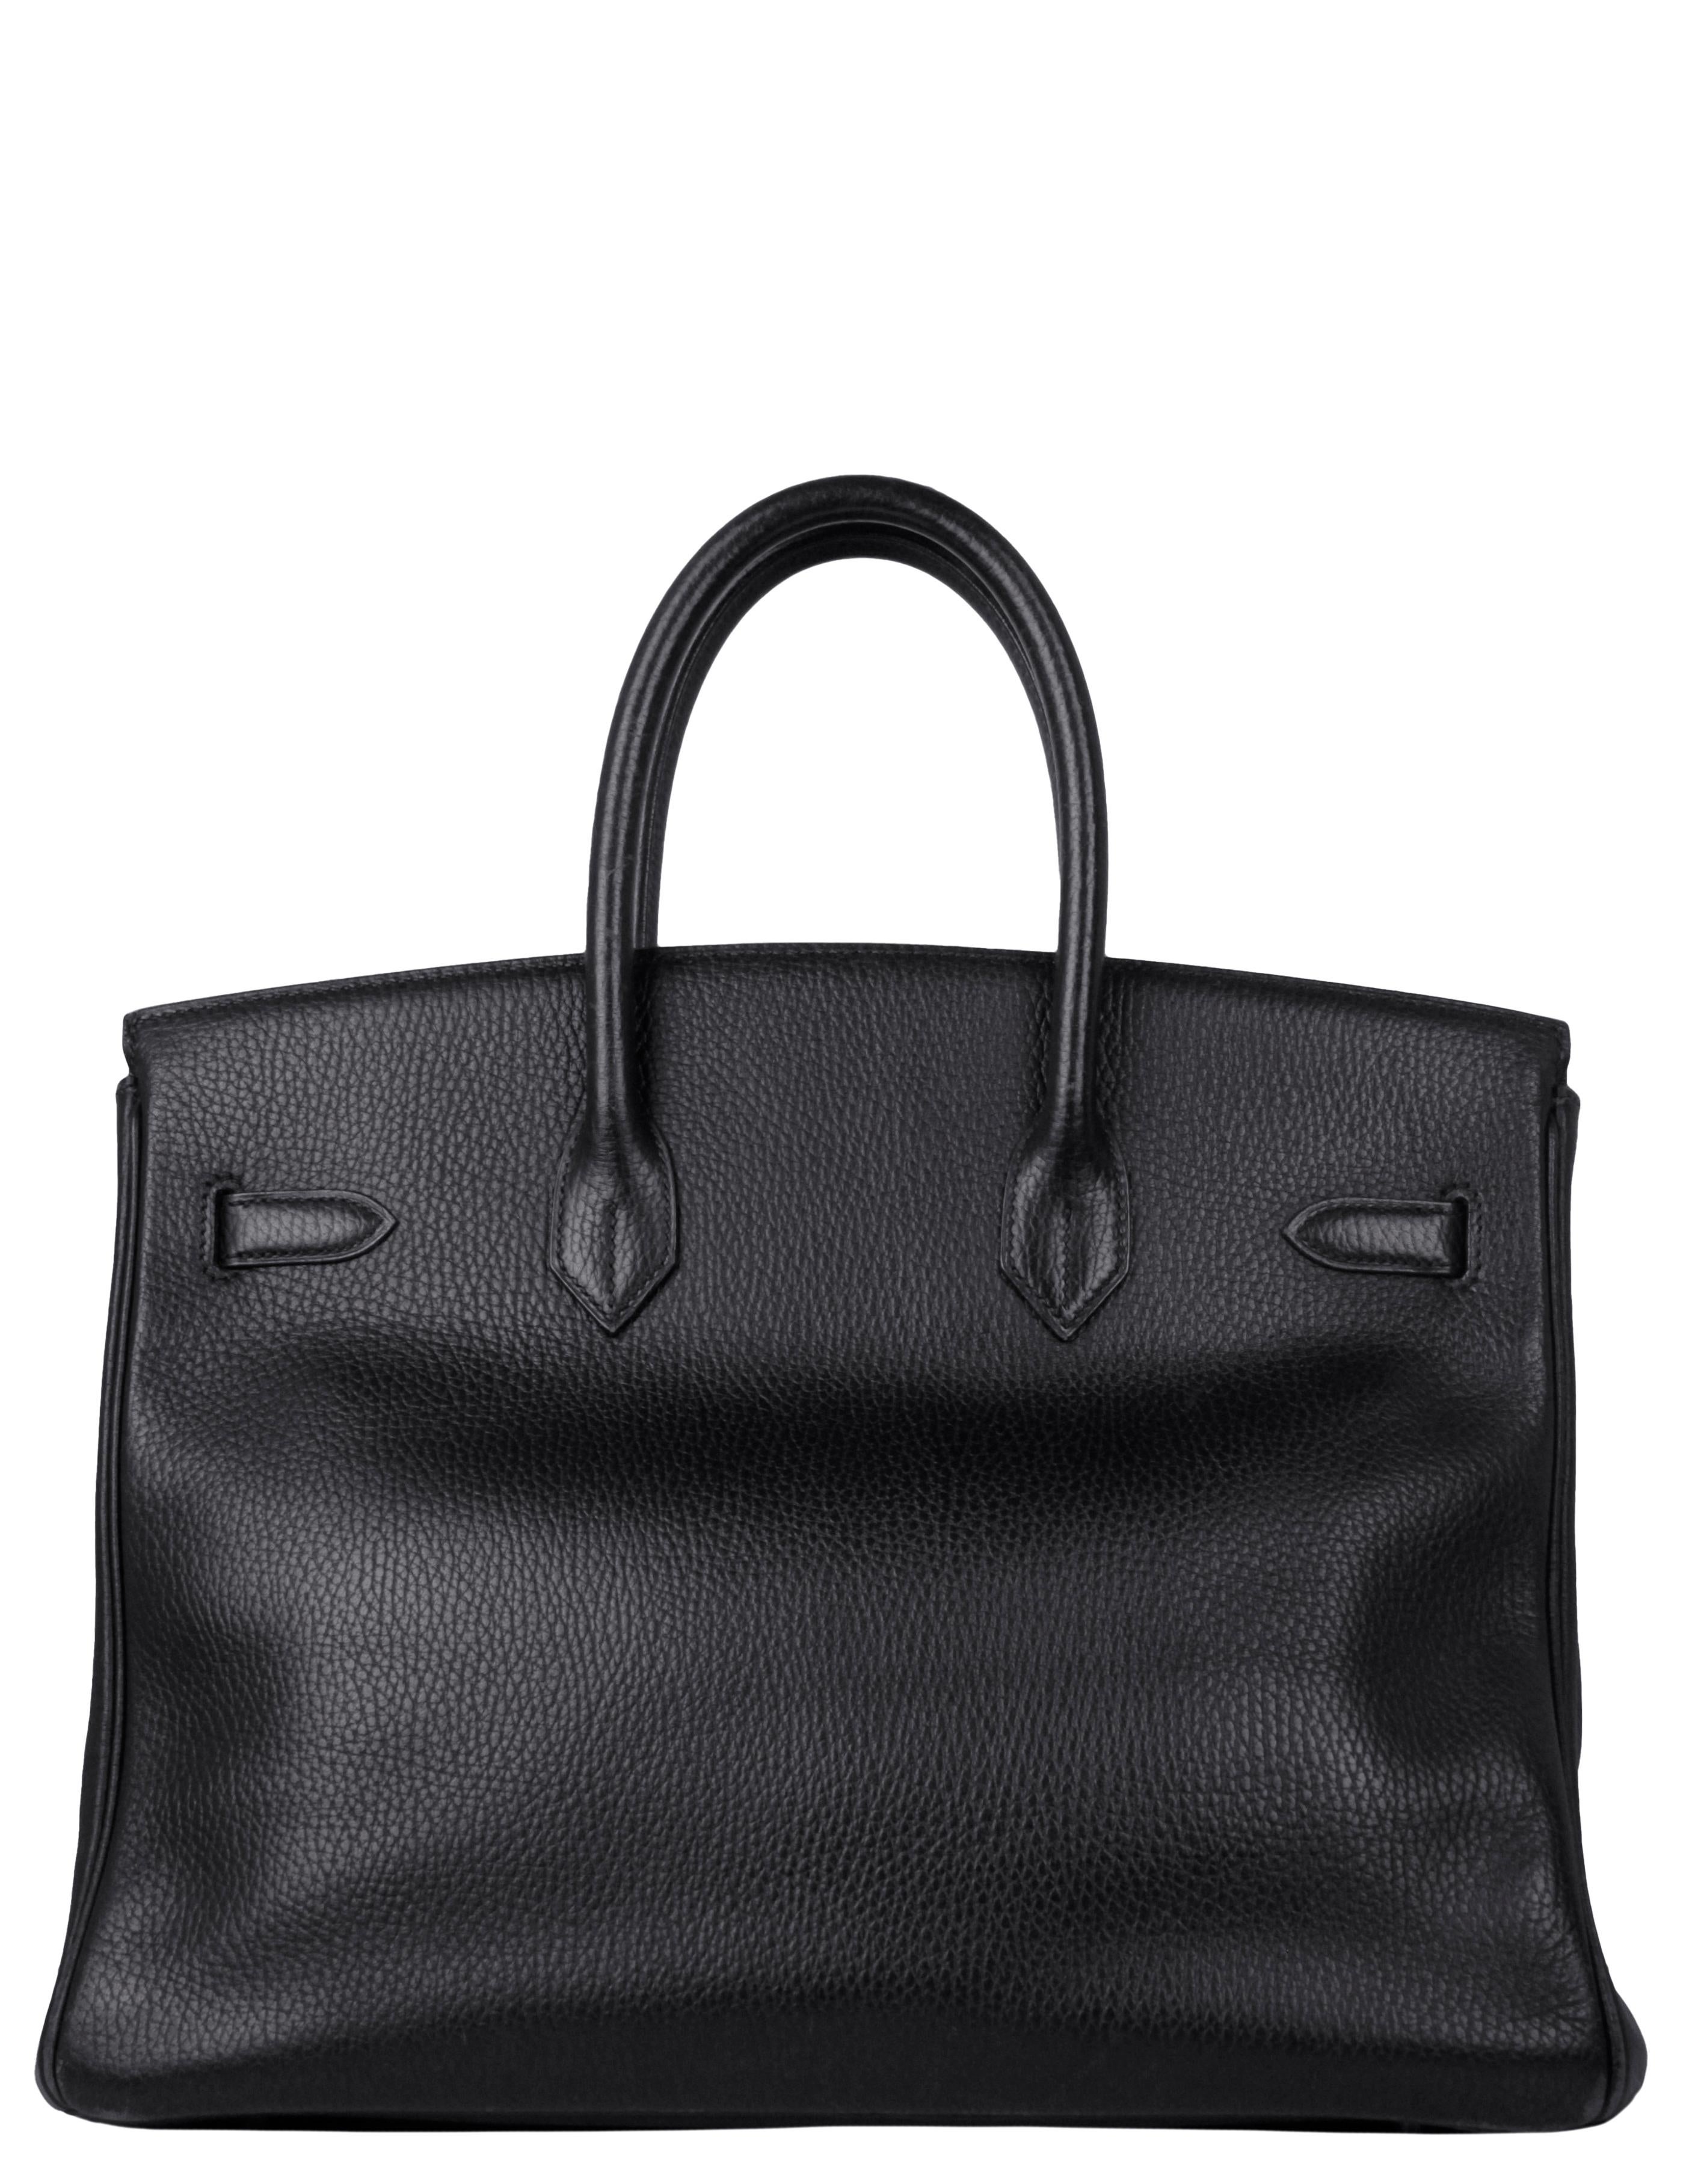 Hermes Black Clemence Leather 35cm Birkin Bag GHW

Made In: France
Year of Production: 1998
Color: Black
Hardware: Gold
Materials: Clemence
Lining: Chevre leather
Closure/Opening: Double arm strap with twist lock
Interior Pockets: One zip and one